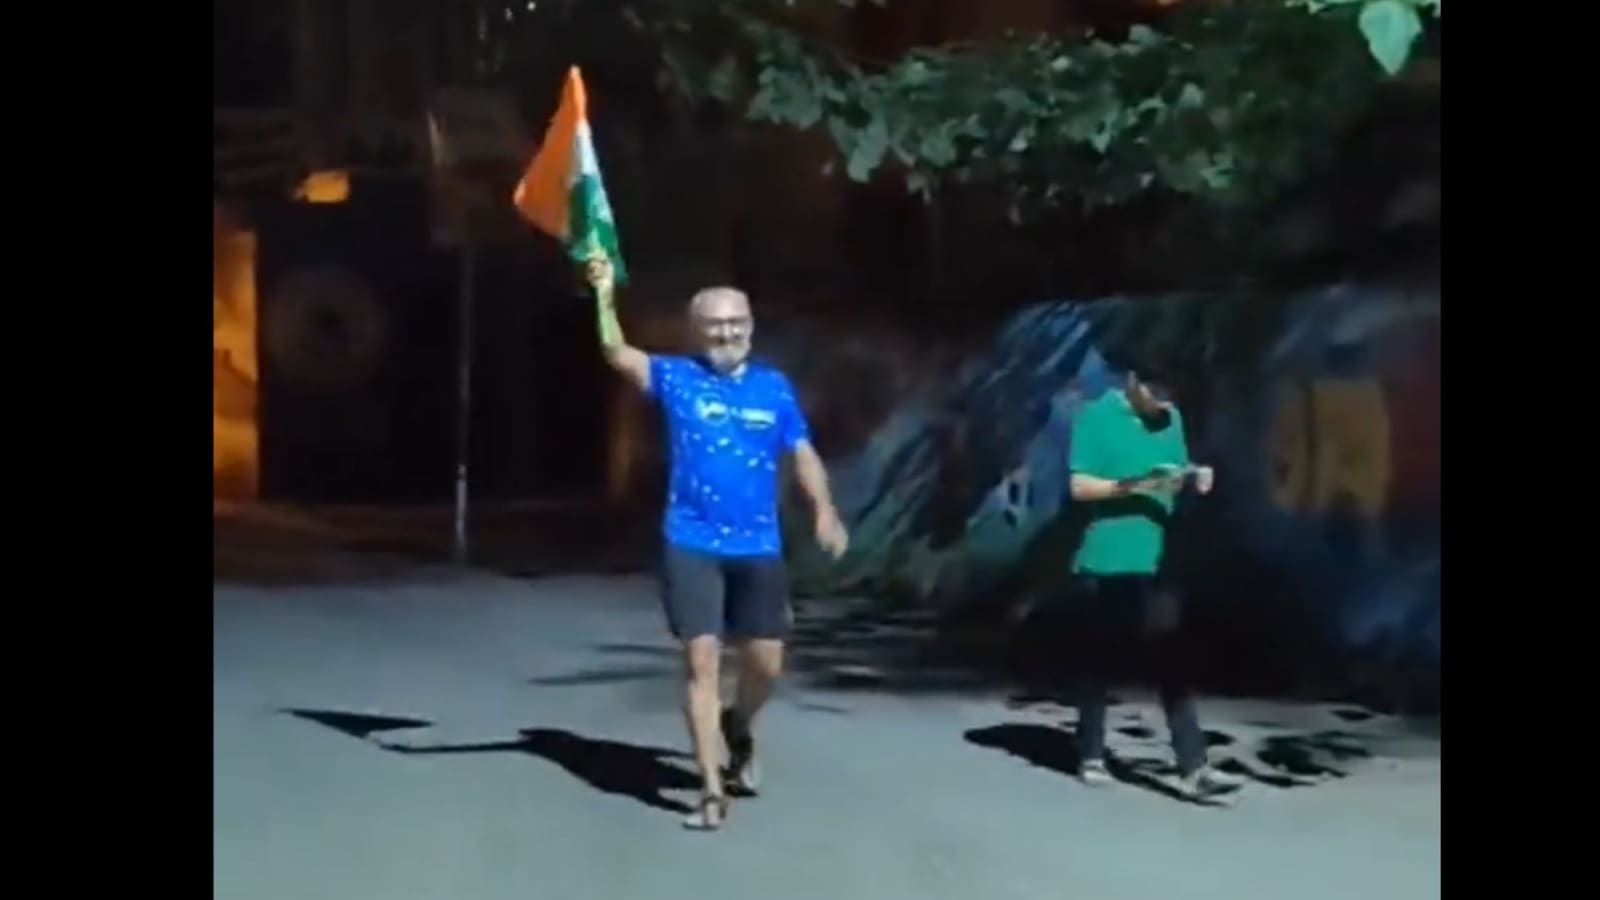 Man covers 73 km on foot in 13 hours to trace India’s map in Bengaluru